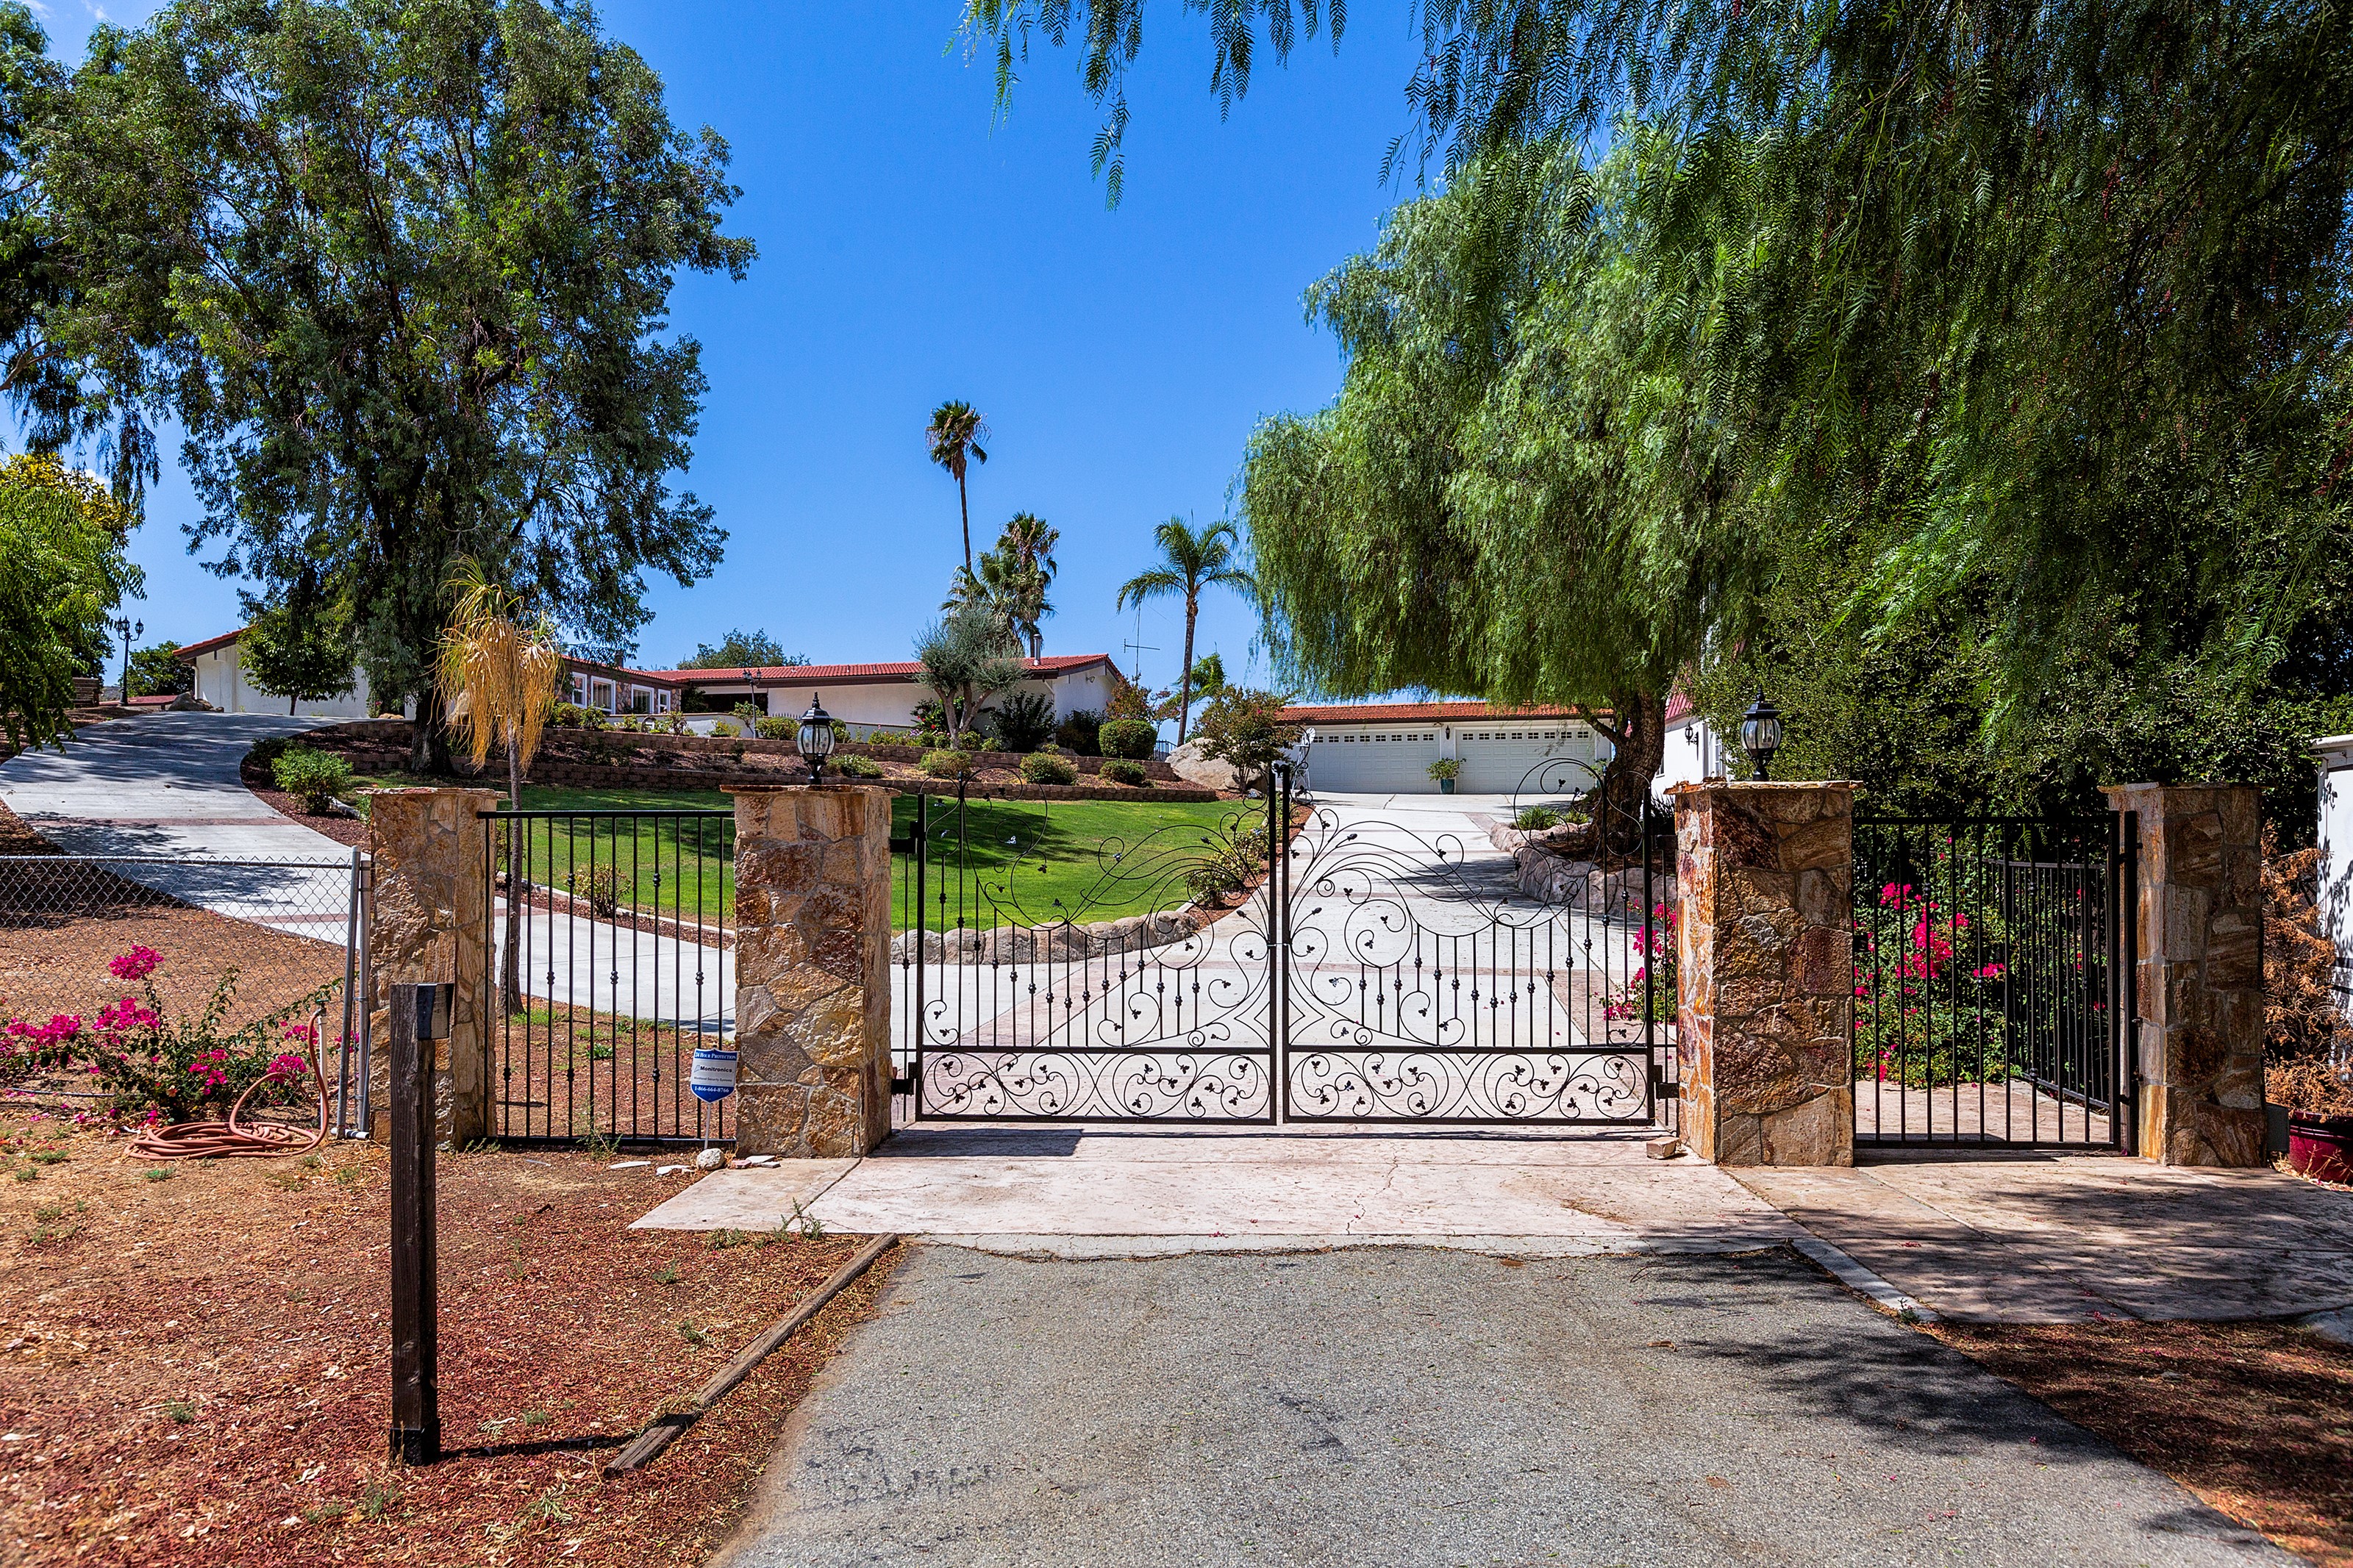 Just Listed! Ranch Horse Property Pool Home Estate with Casita. Call Denise Gentile, Realtor at Coldwell Banker Associated Brokers Realty for more info or showing. 951-751-1311.